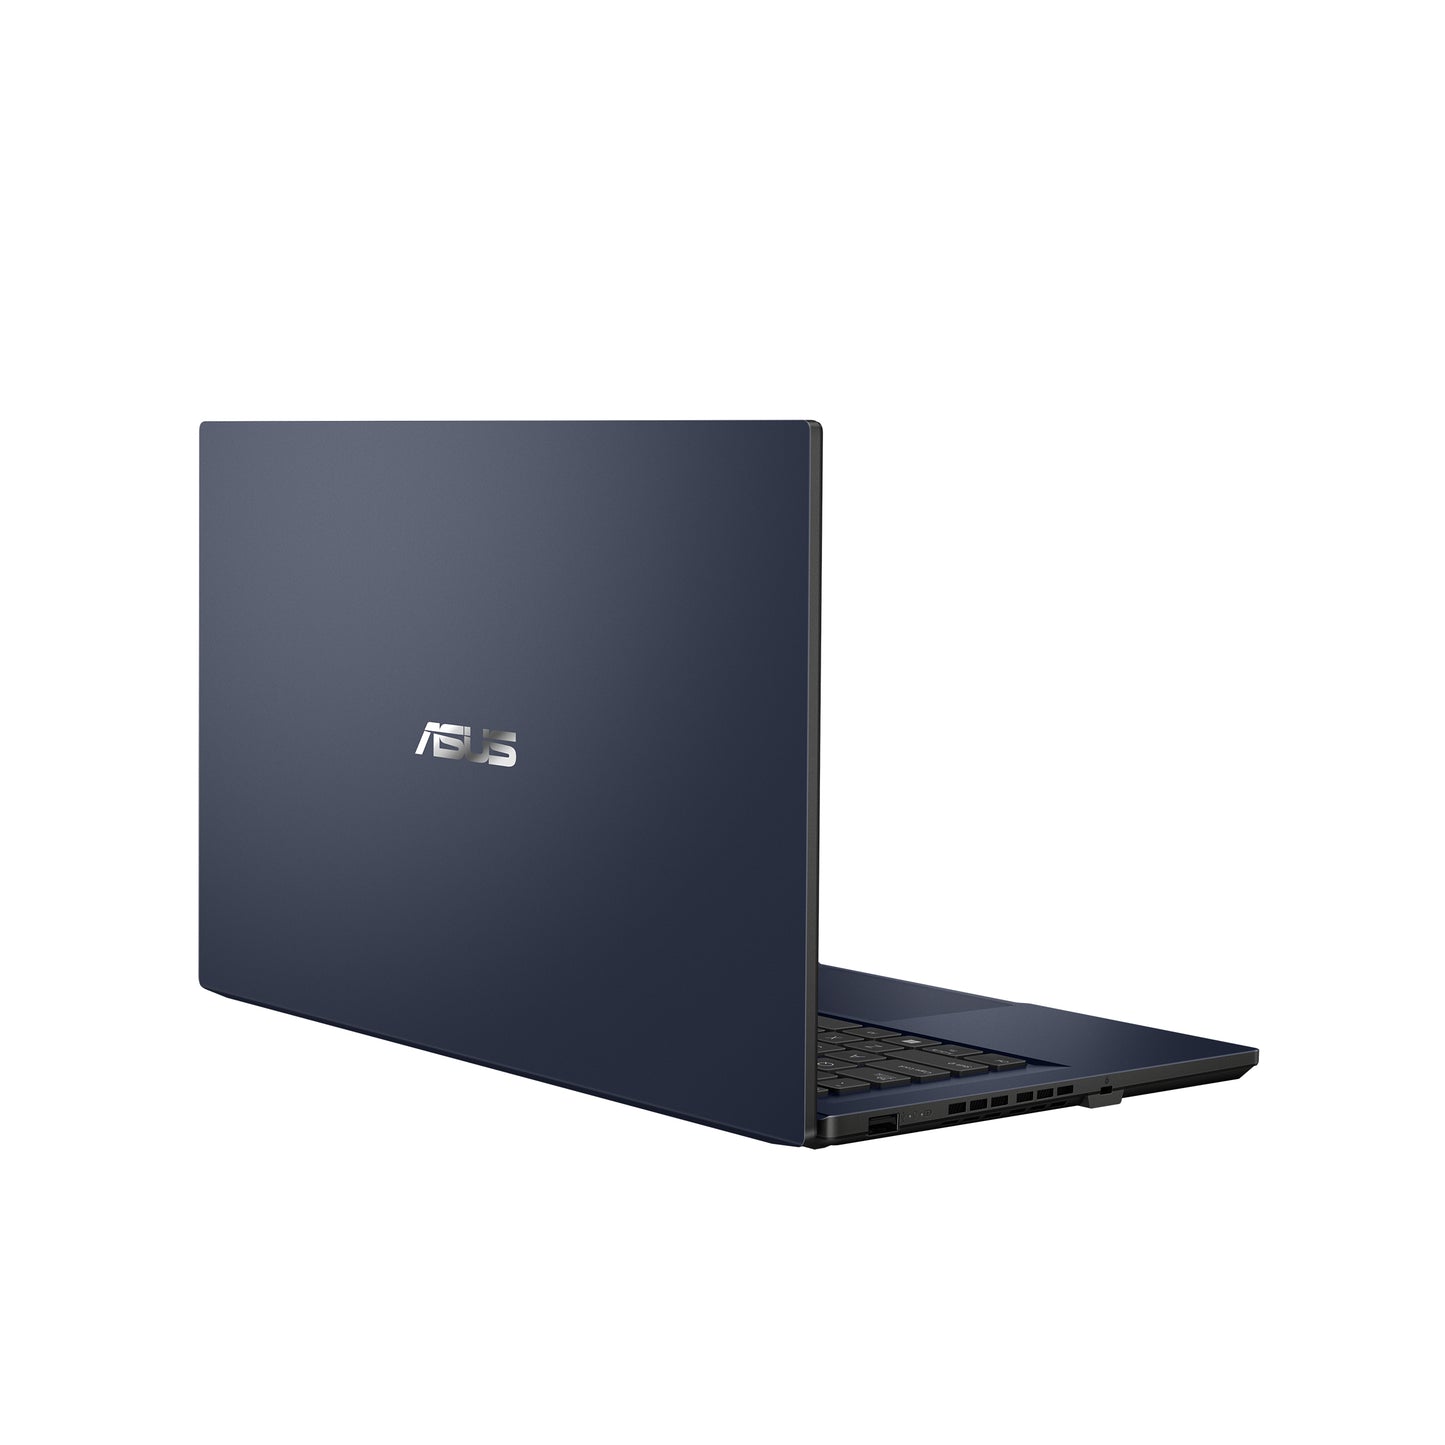 ASUS COMERCIAL NB ASUS B1 B1402 14IN CORE I7-1SYST 255U INTEL UHD W11P 16GB 512SSD 1Y NB ASUS B1 B1402 14IN CORE I7-1 255U INTEL UHD W11P 16GB 512SSD 1YW